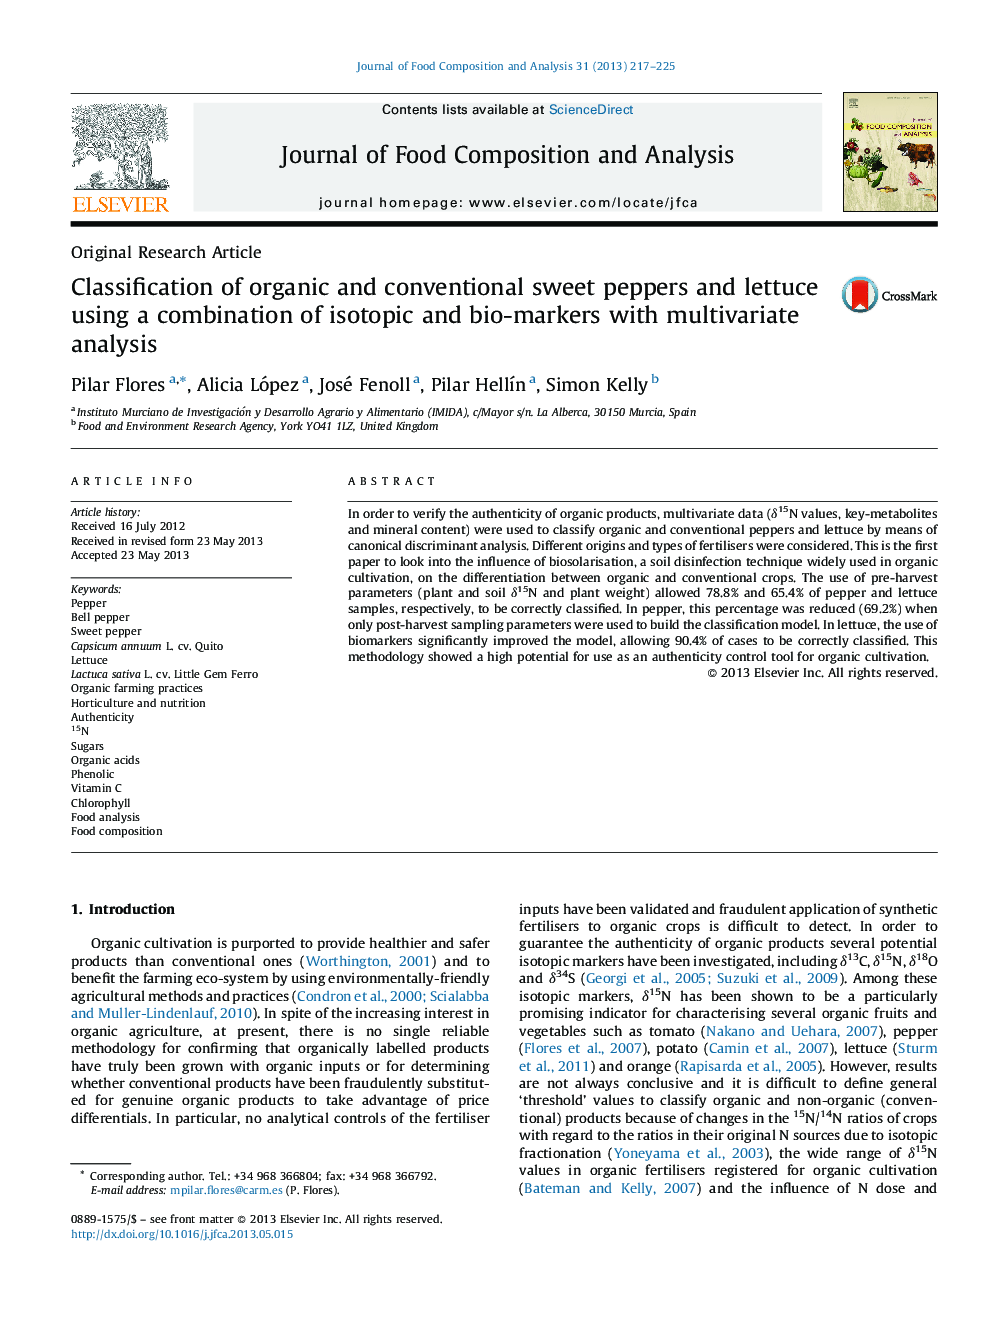 Classification of organic and conventional sweet peppers and lettuce using a combination of isotopic and bio-markers with multivariate analysis